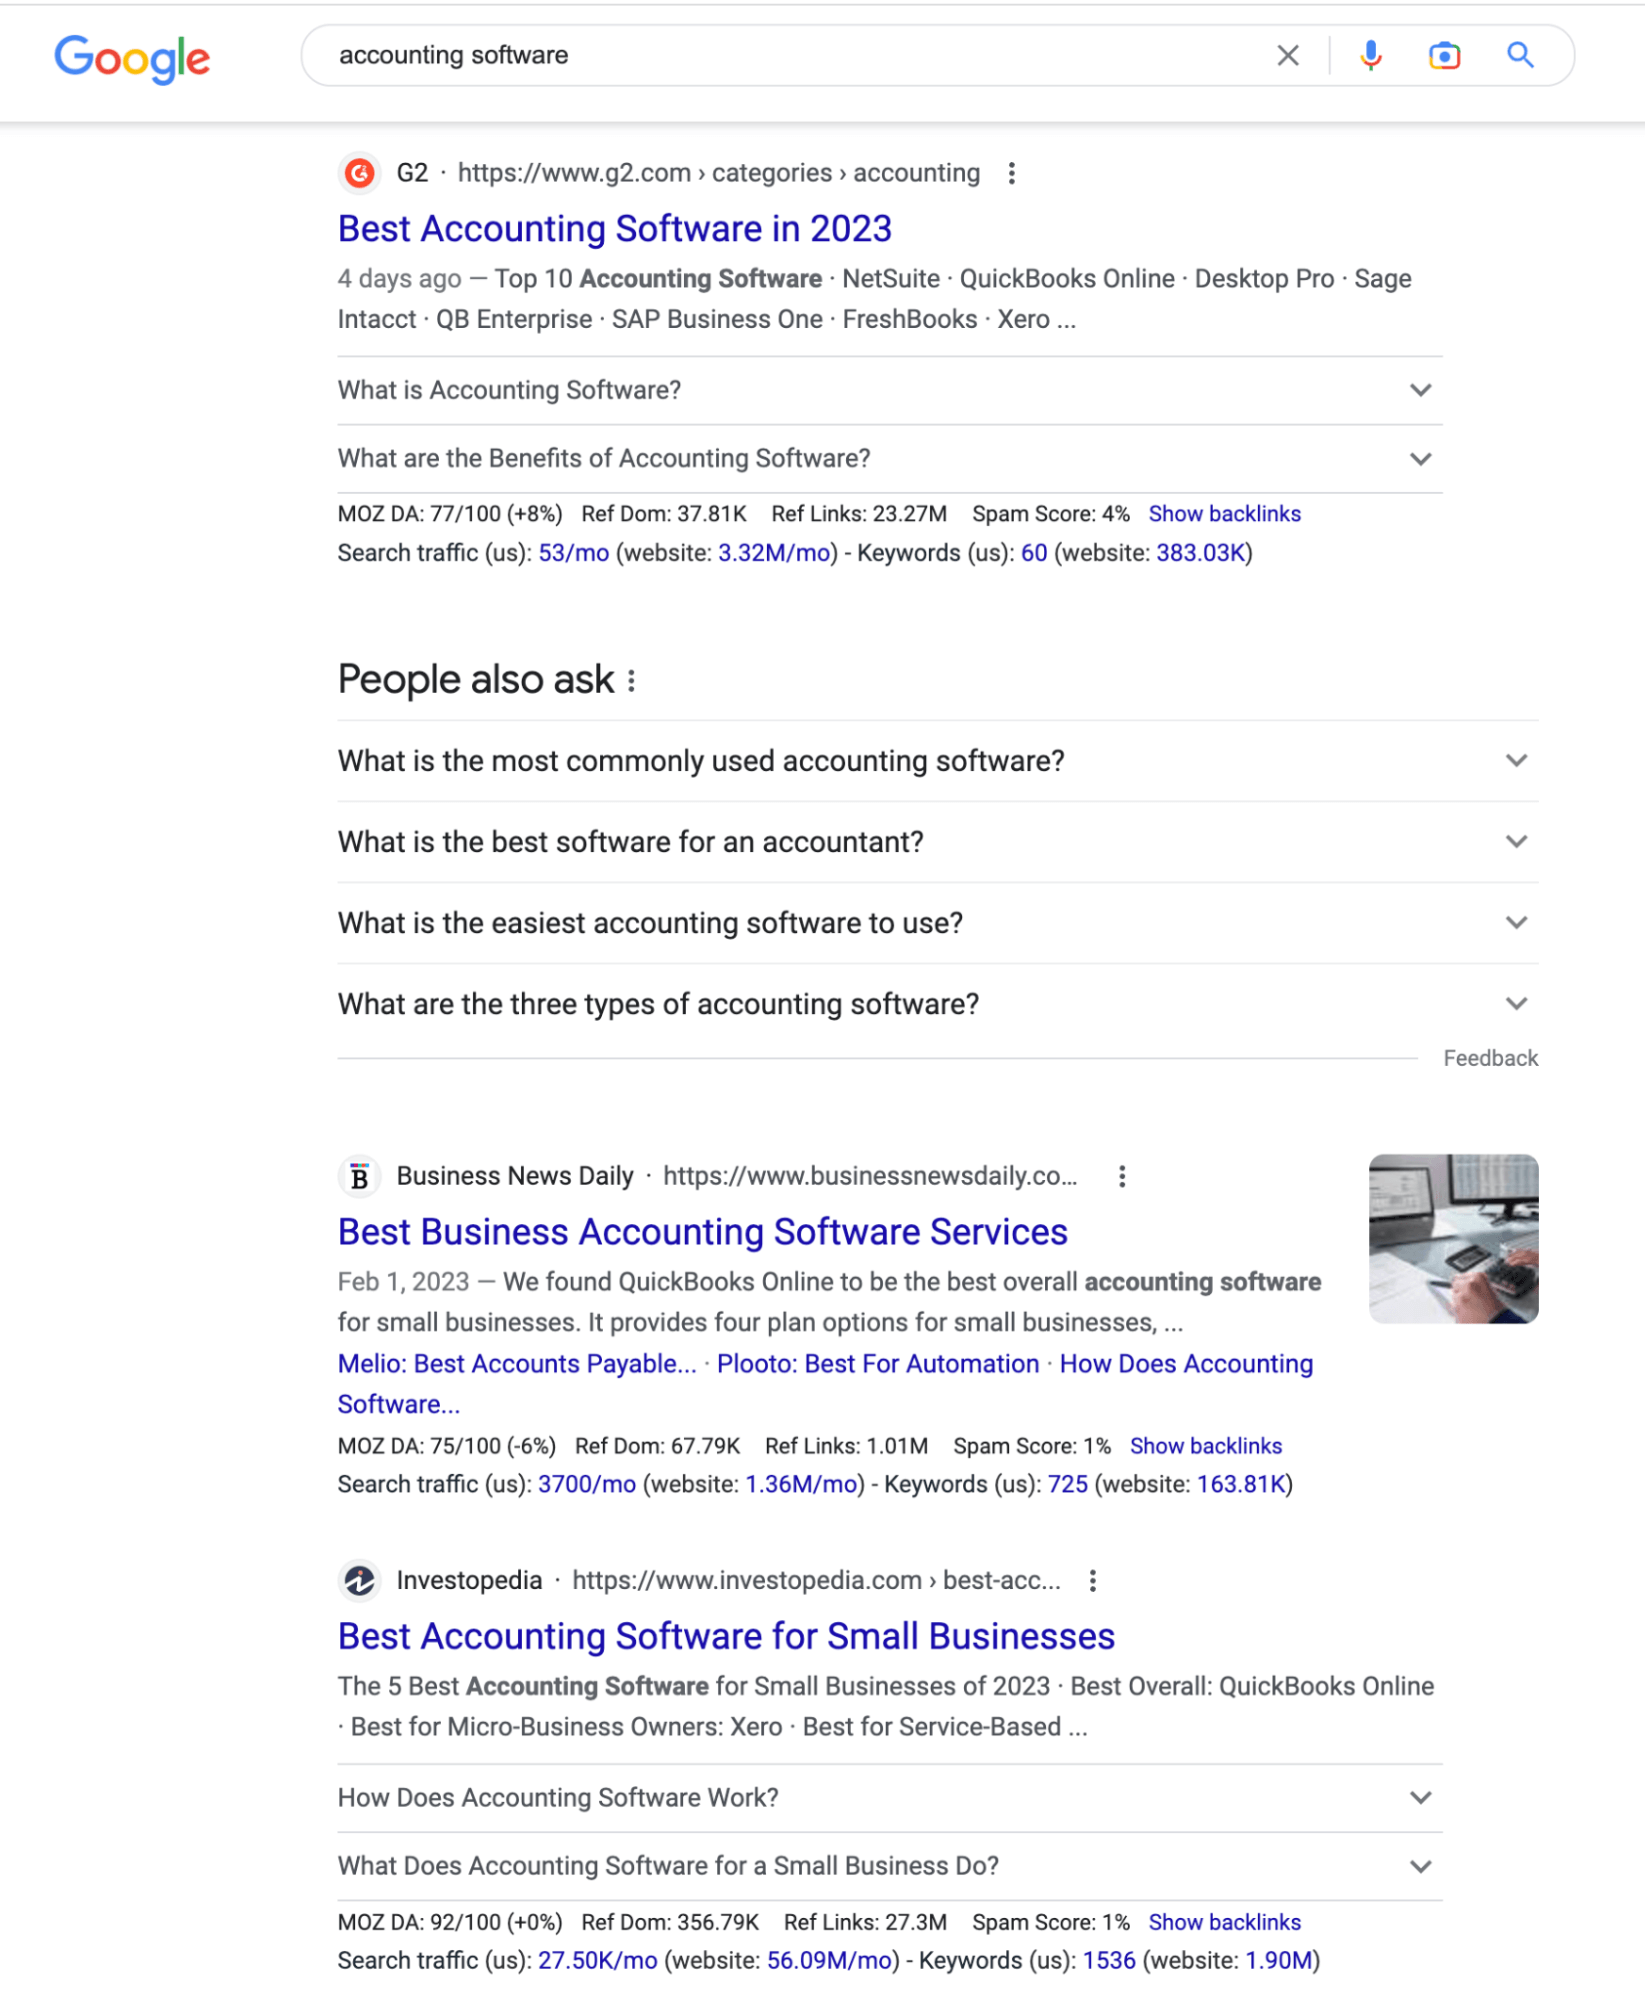 Google SERP for "accounting software"